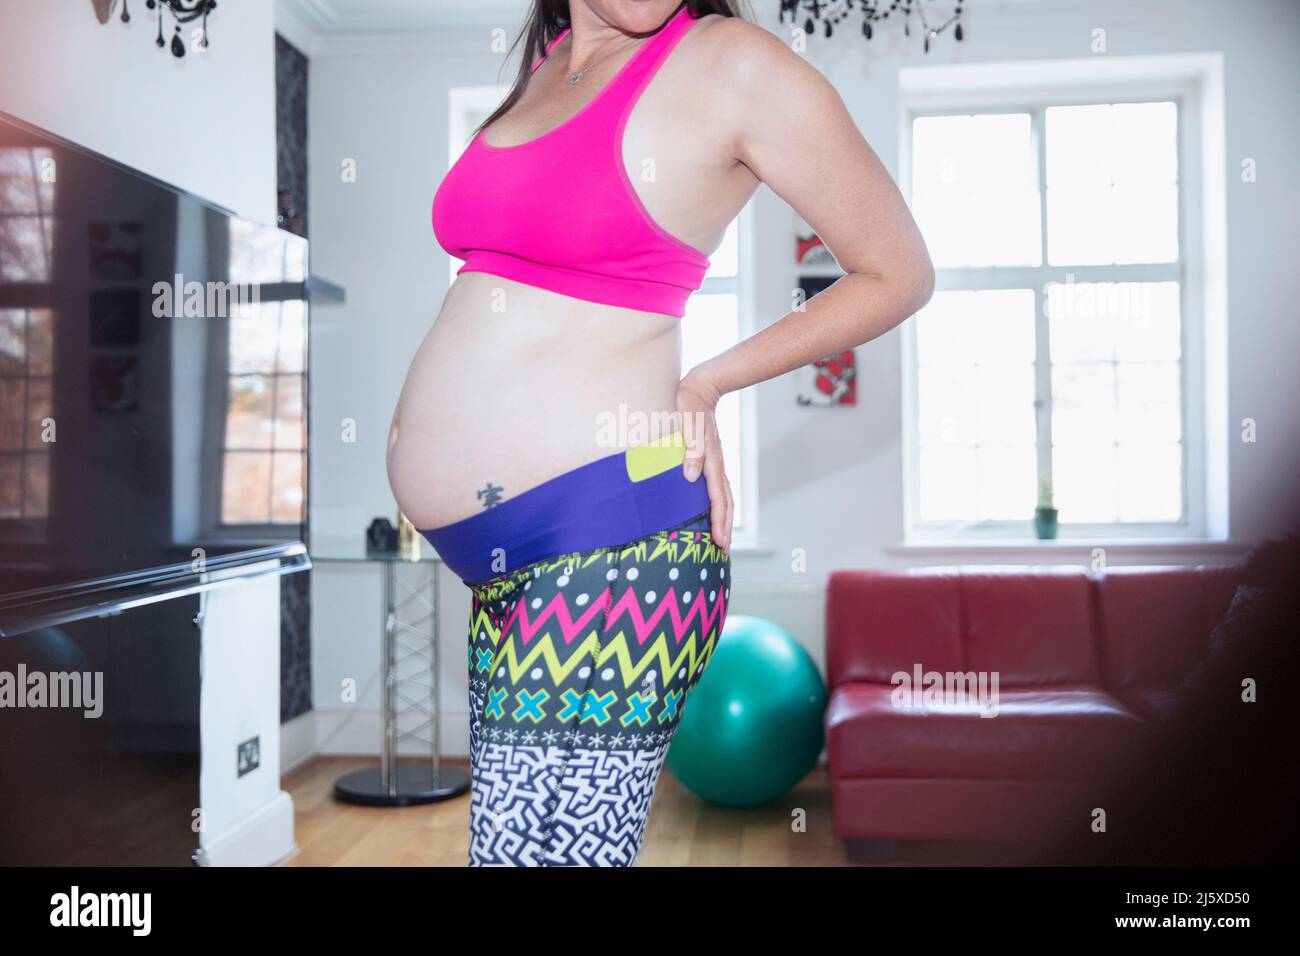 Pregnant woman in sports bra and leggings exercising at home Stock Photo